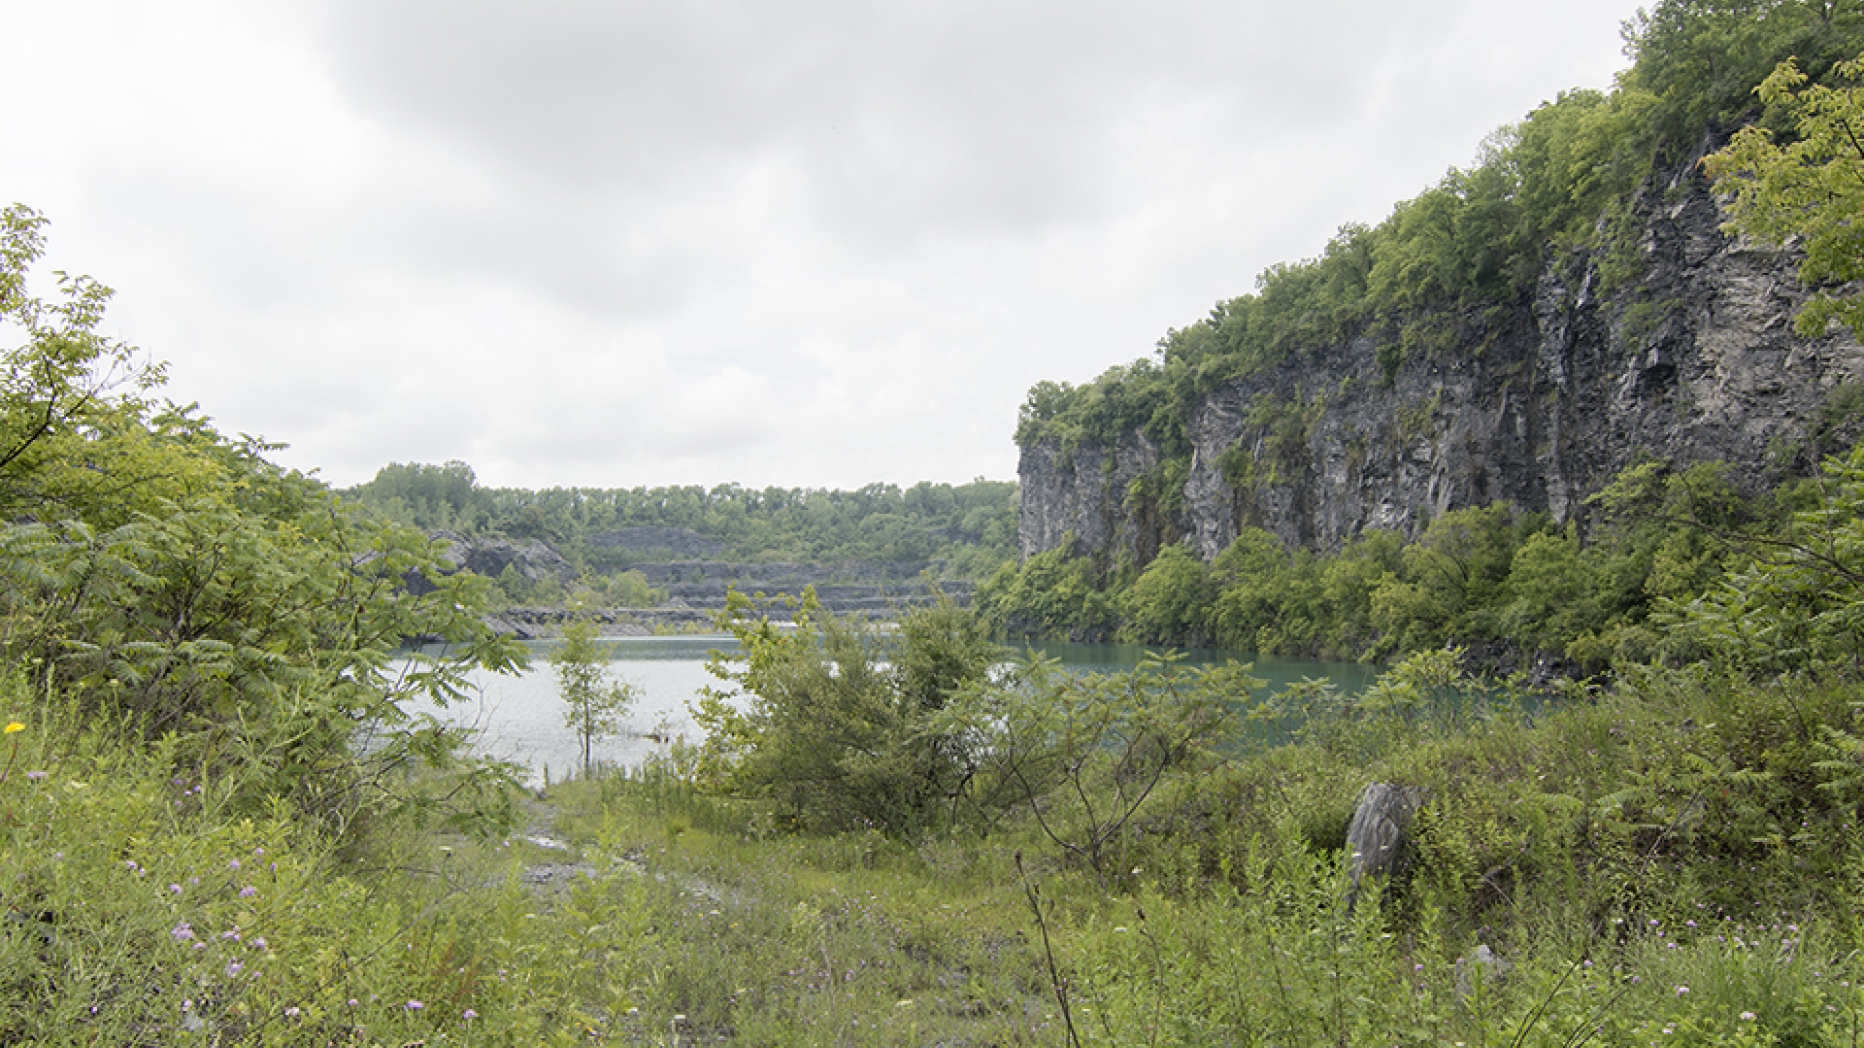 Lake and cliffs in Lehigh Valley.